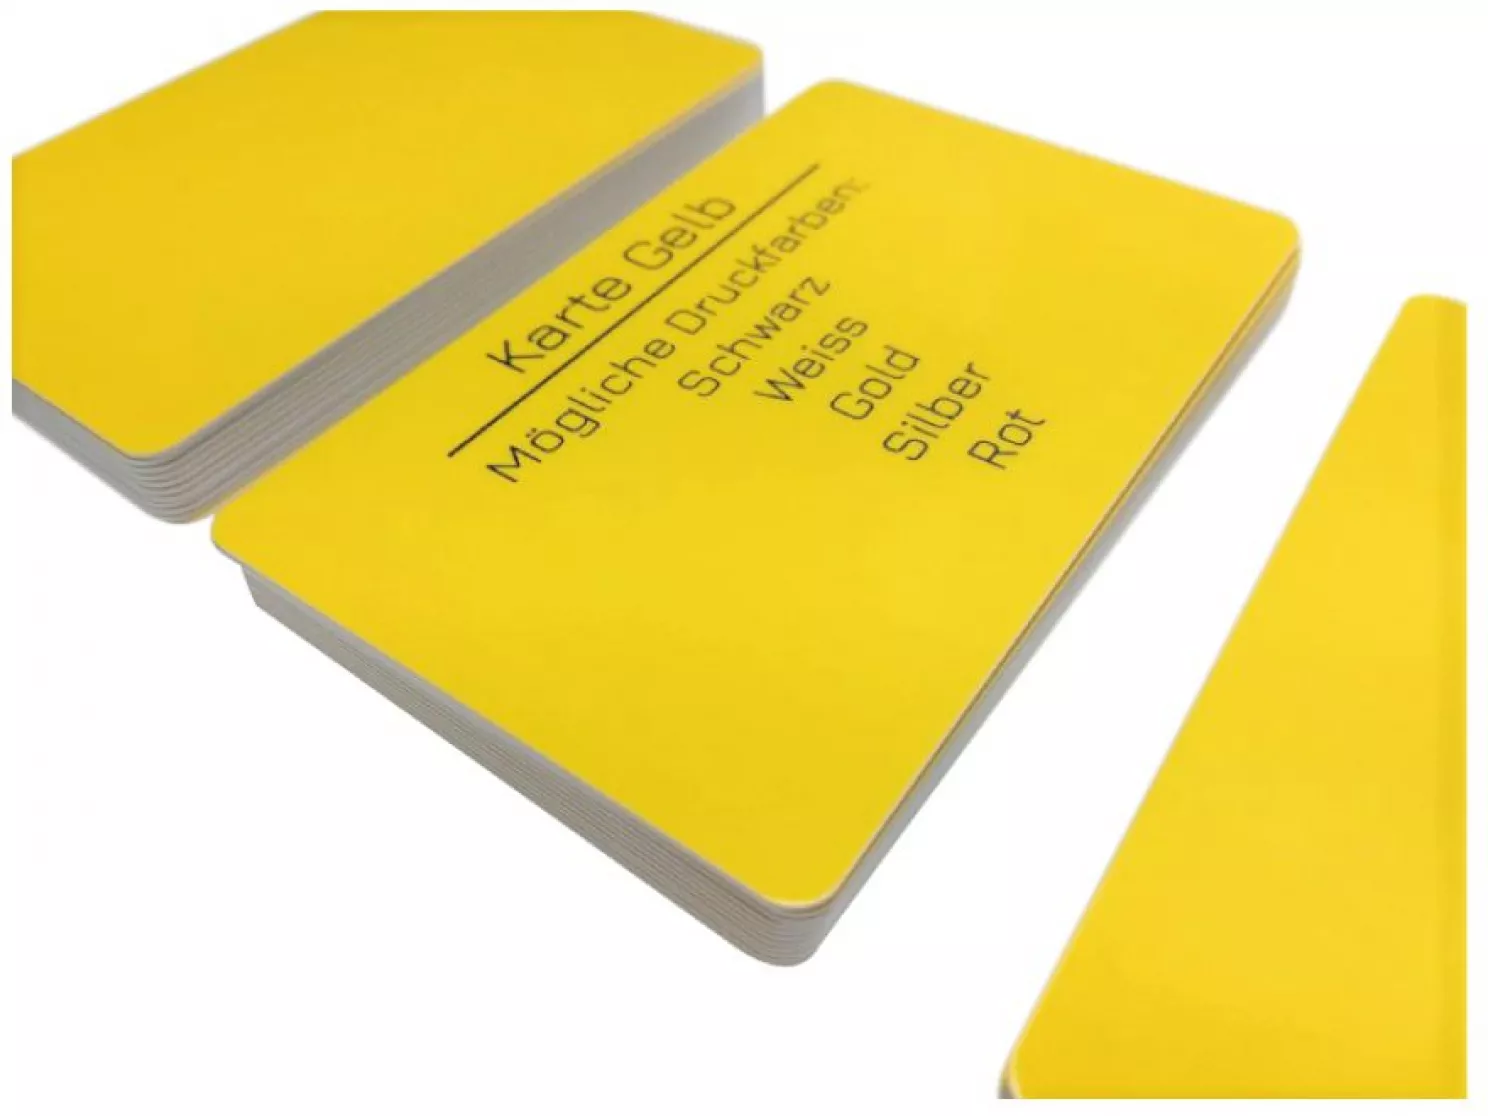 plastic card yellow with signature panel